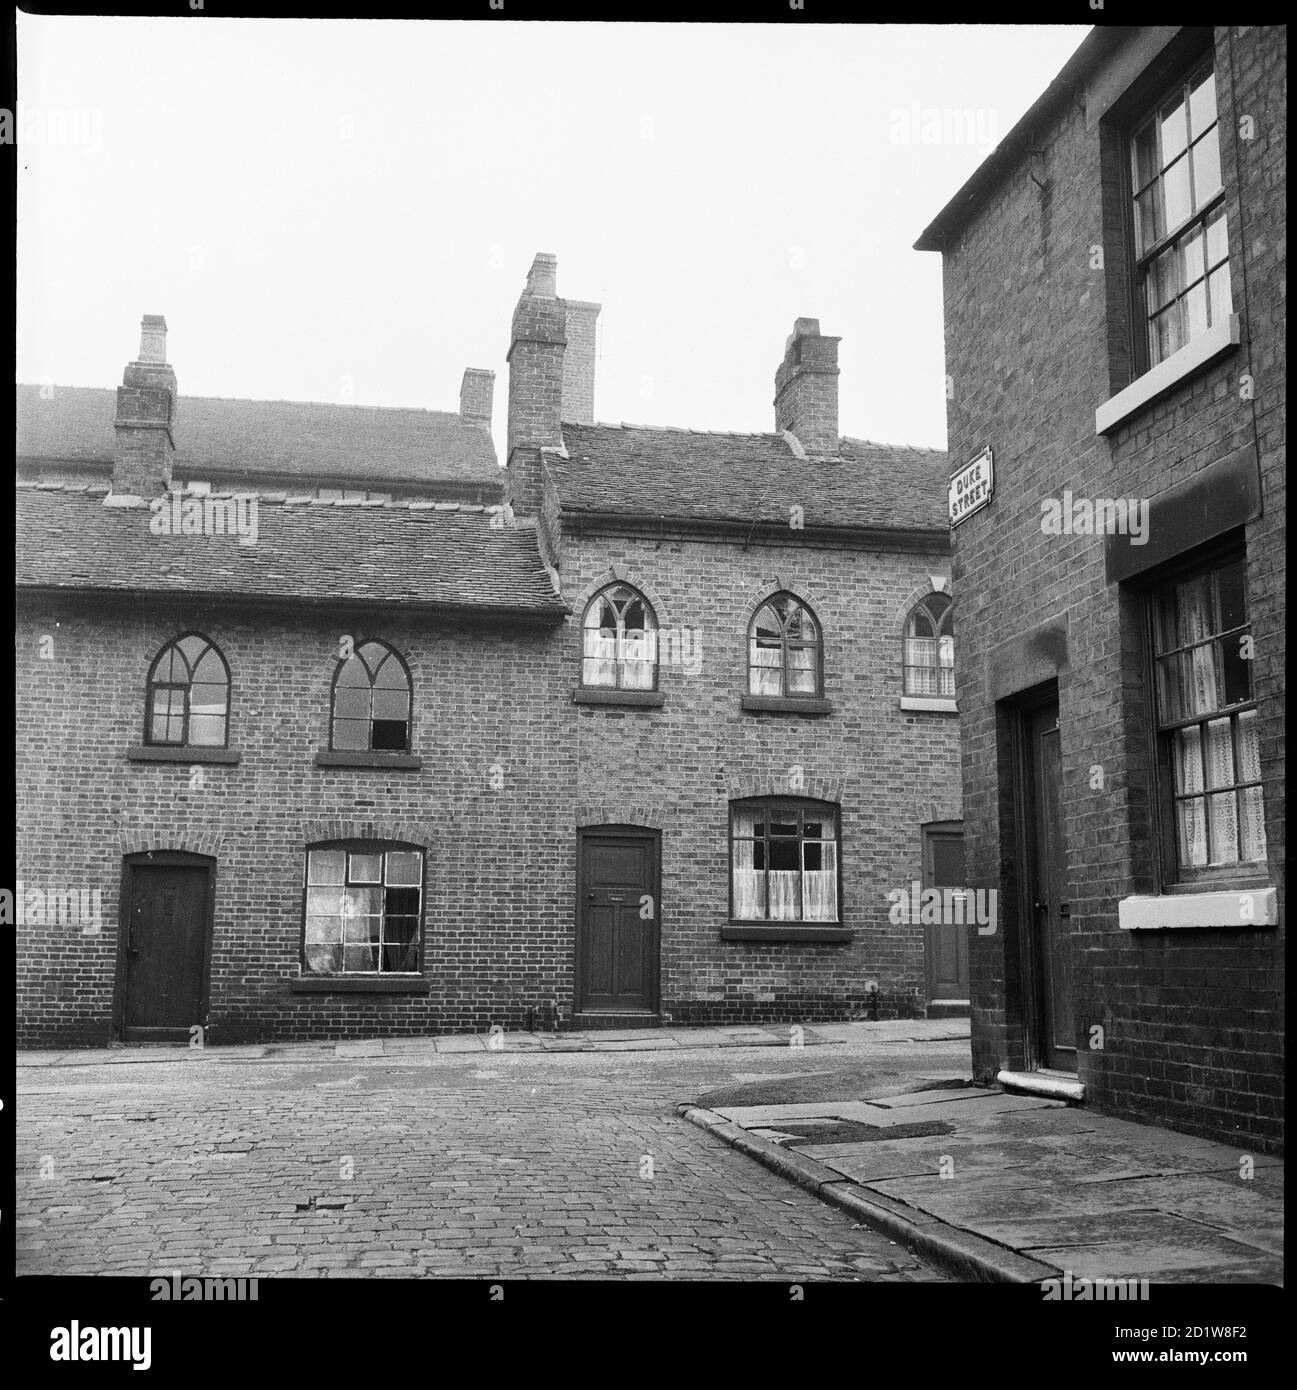 Numbers 41 and 43 London Street viewed from the end of Duke Street with 50 Duke Street visible in the right foreground. Stock Photo